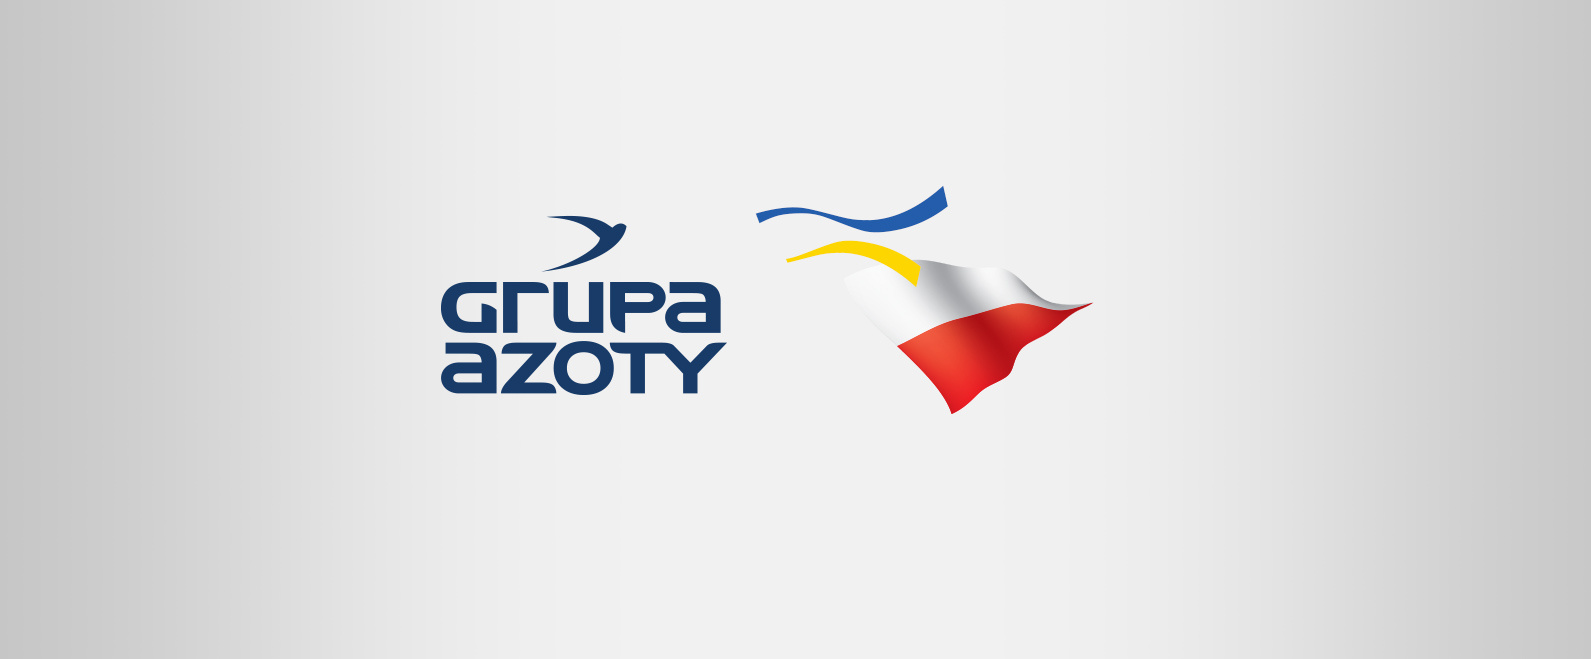 Current status of Grupa Azoty’s assistance for Ukrainian Refugees